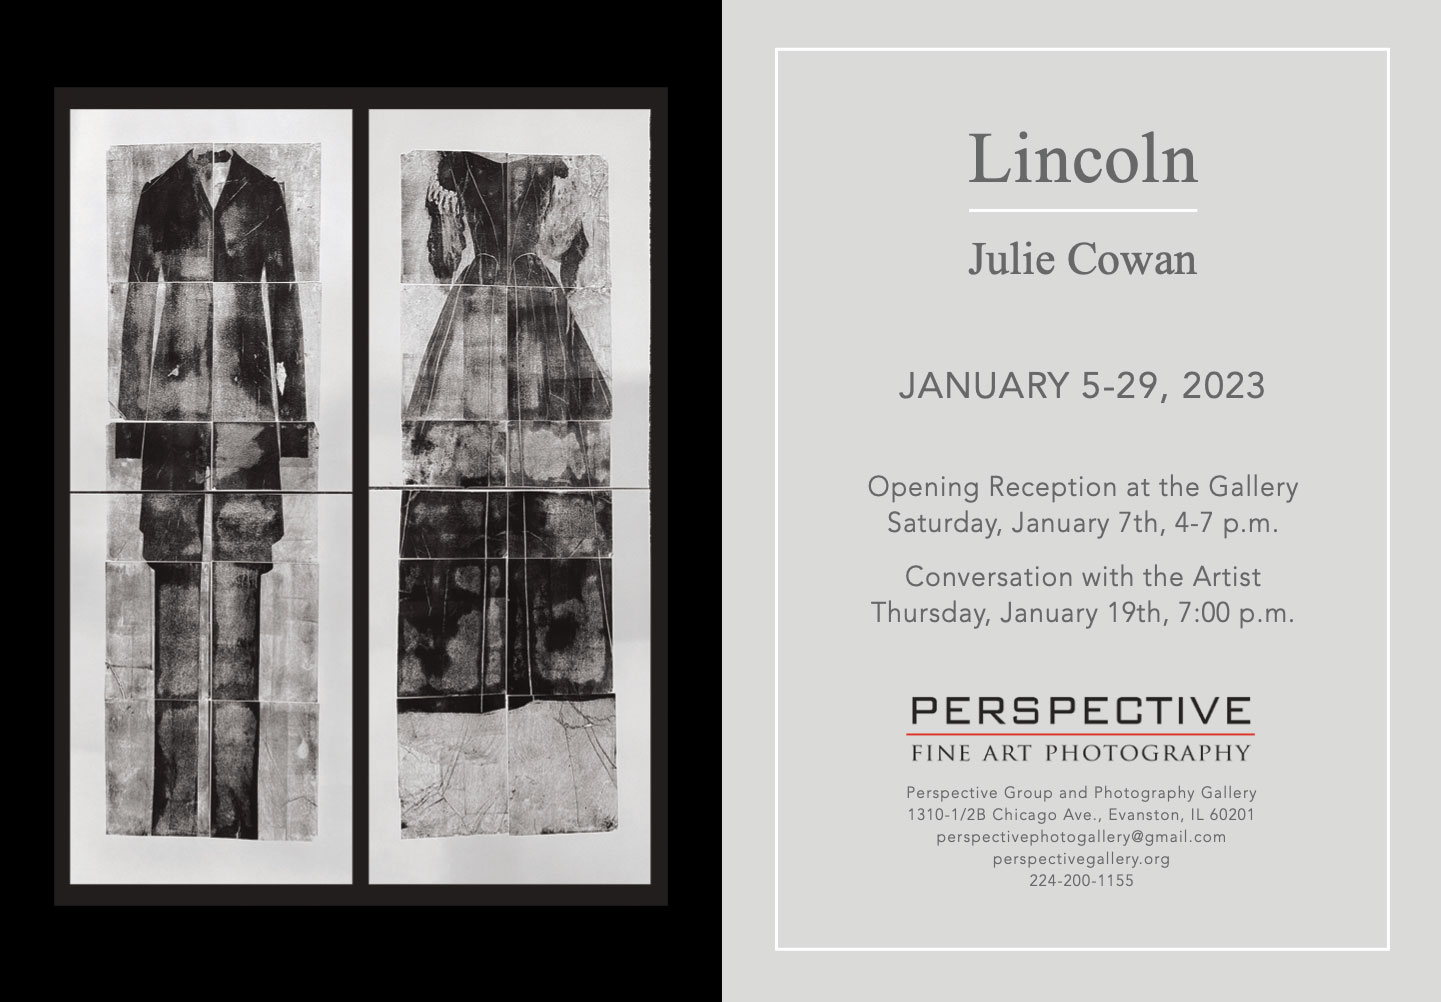 invitation to exhibit of lithographs by julie cowan at Perspective Gallery